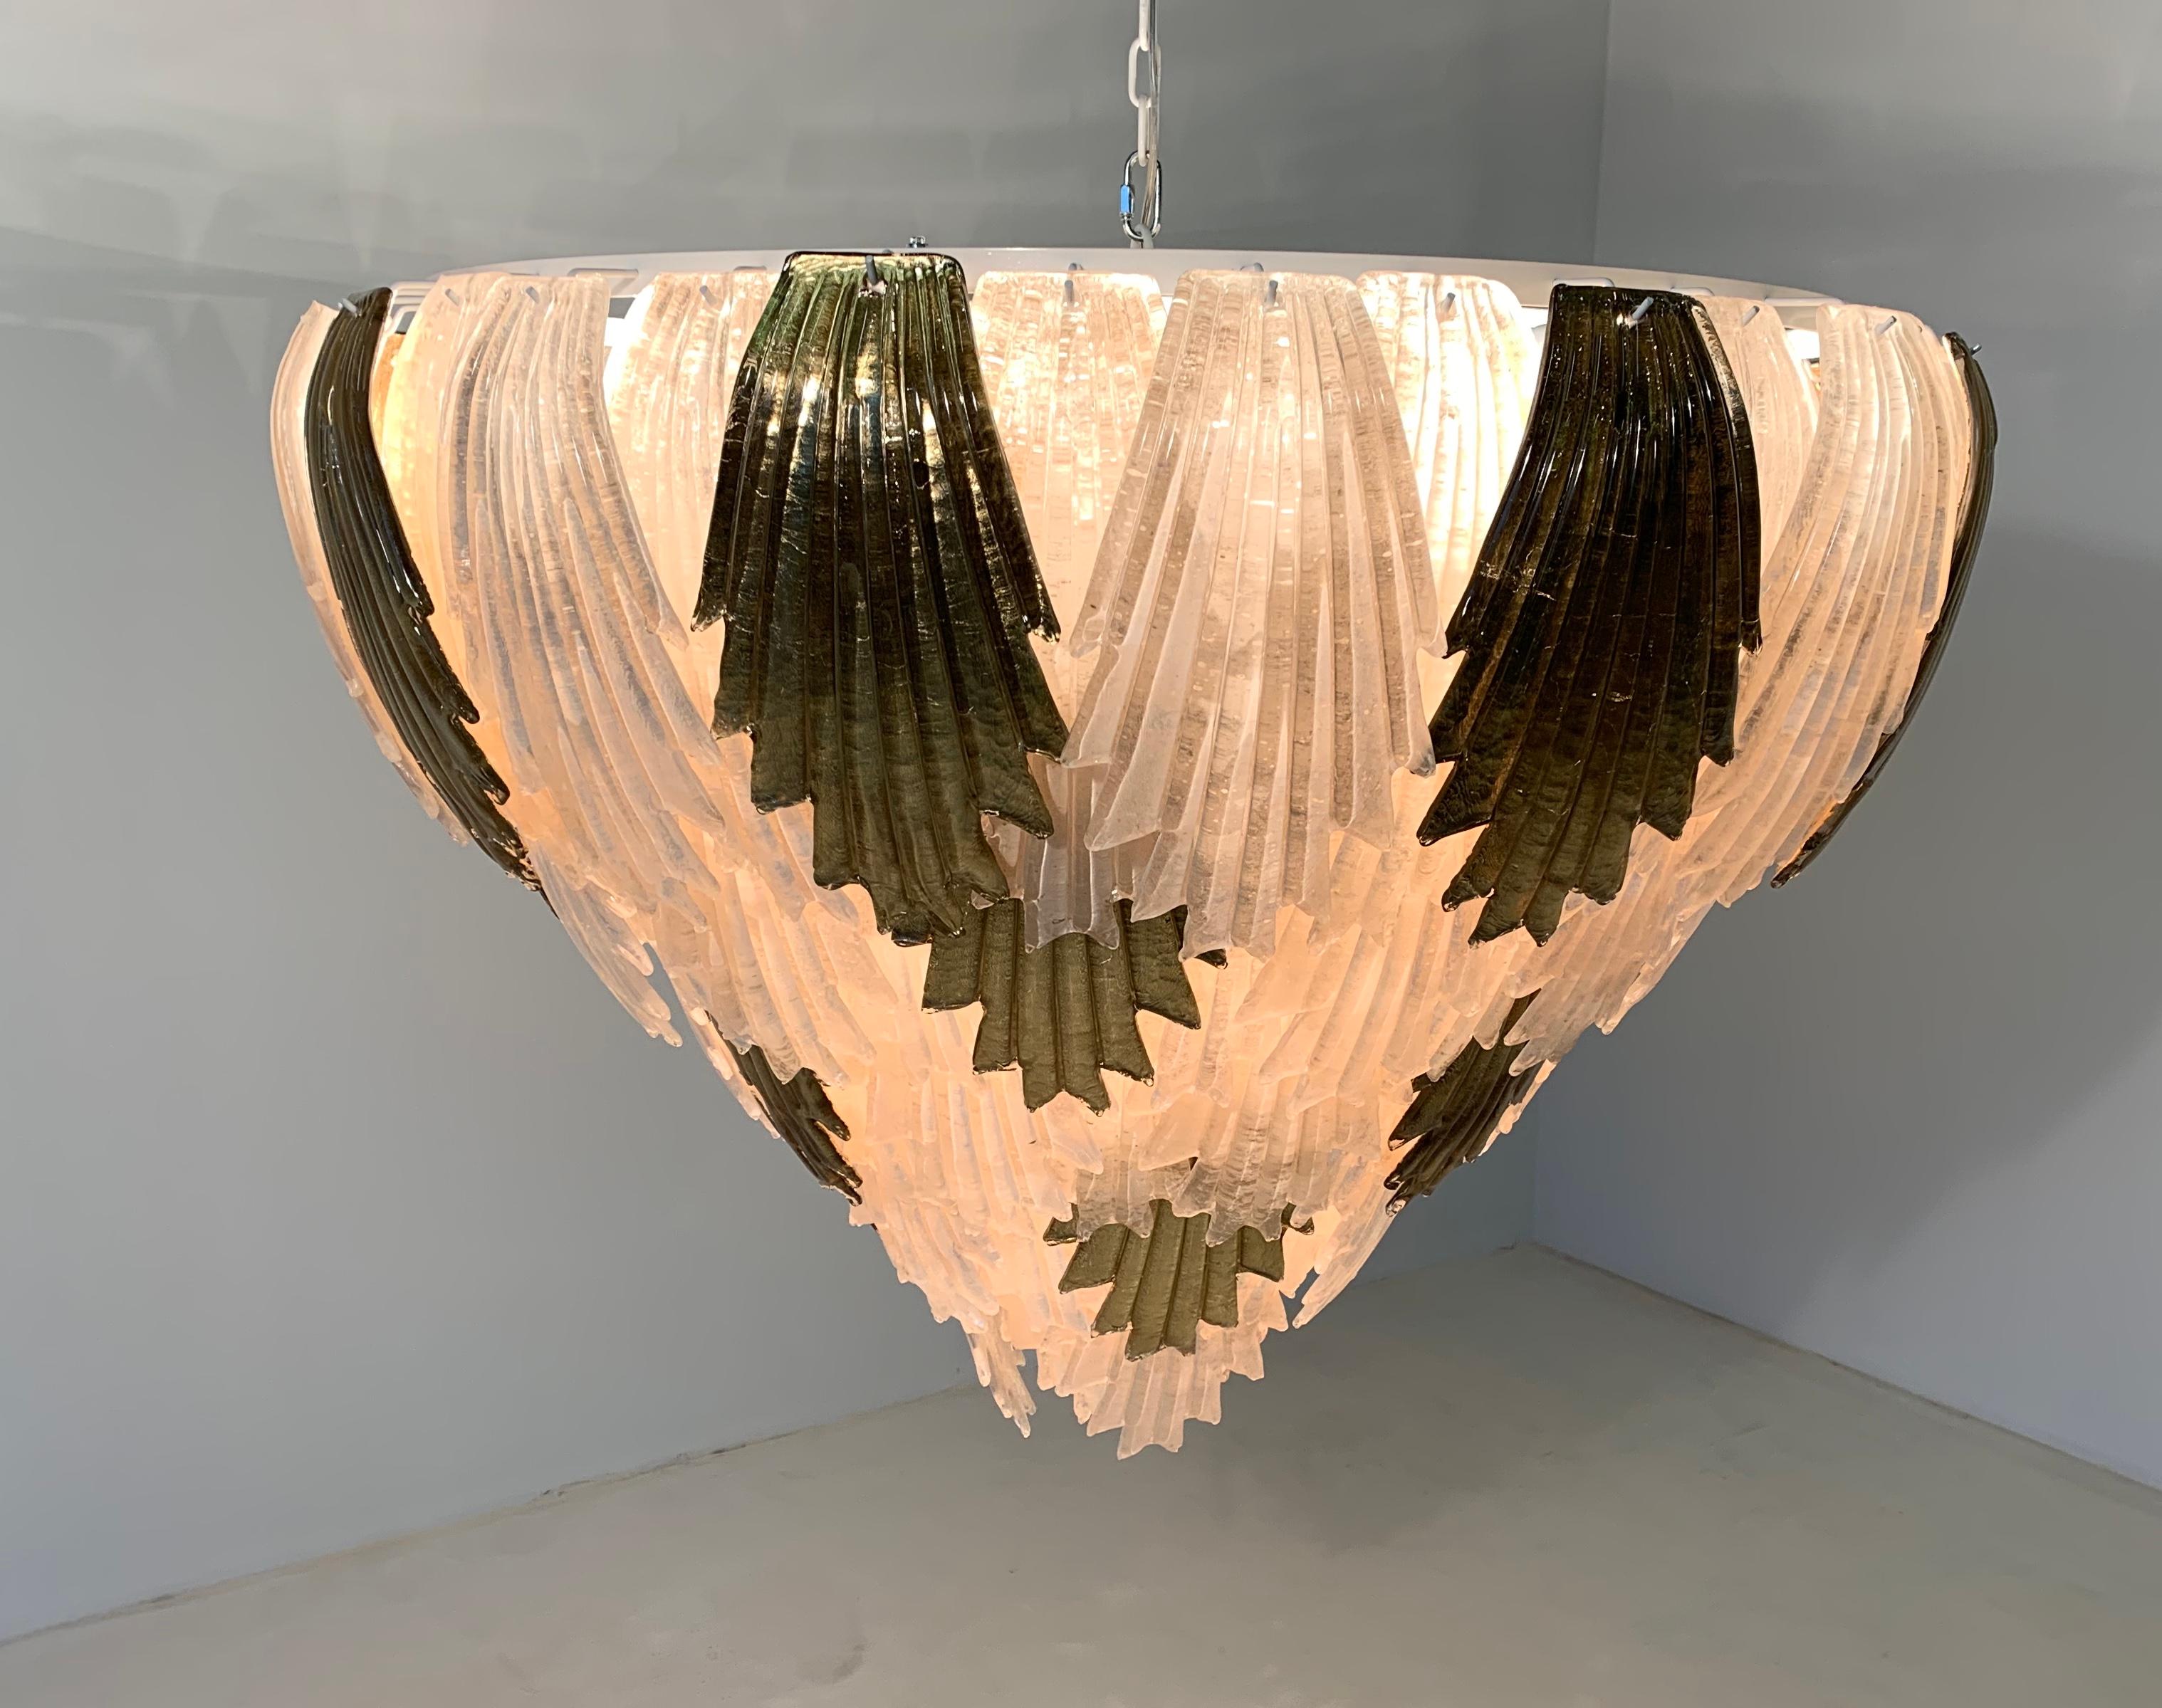 Stunning and large Murano glass chandelier formed by precious and important ivory and gold leaf glass leaves.
These fine pieces of glass are specially designed to create a warm and welcoming environment when lit.
This chandelier has been wired to